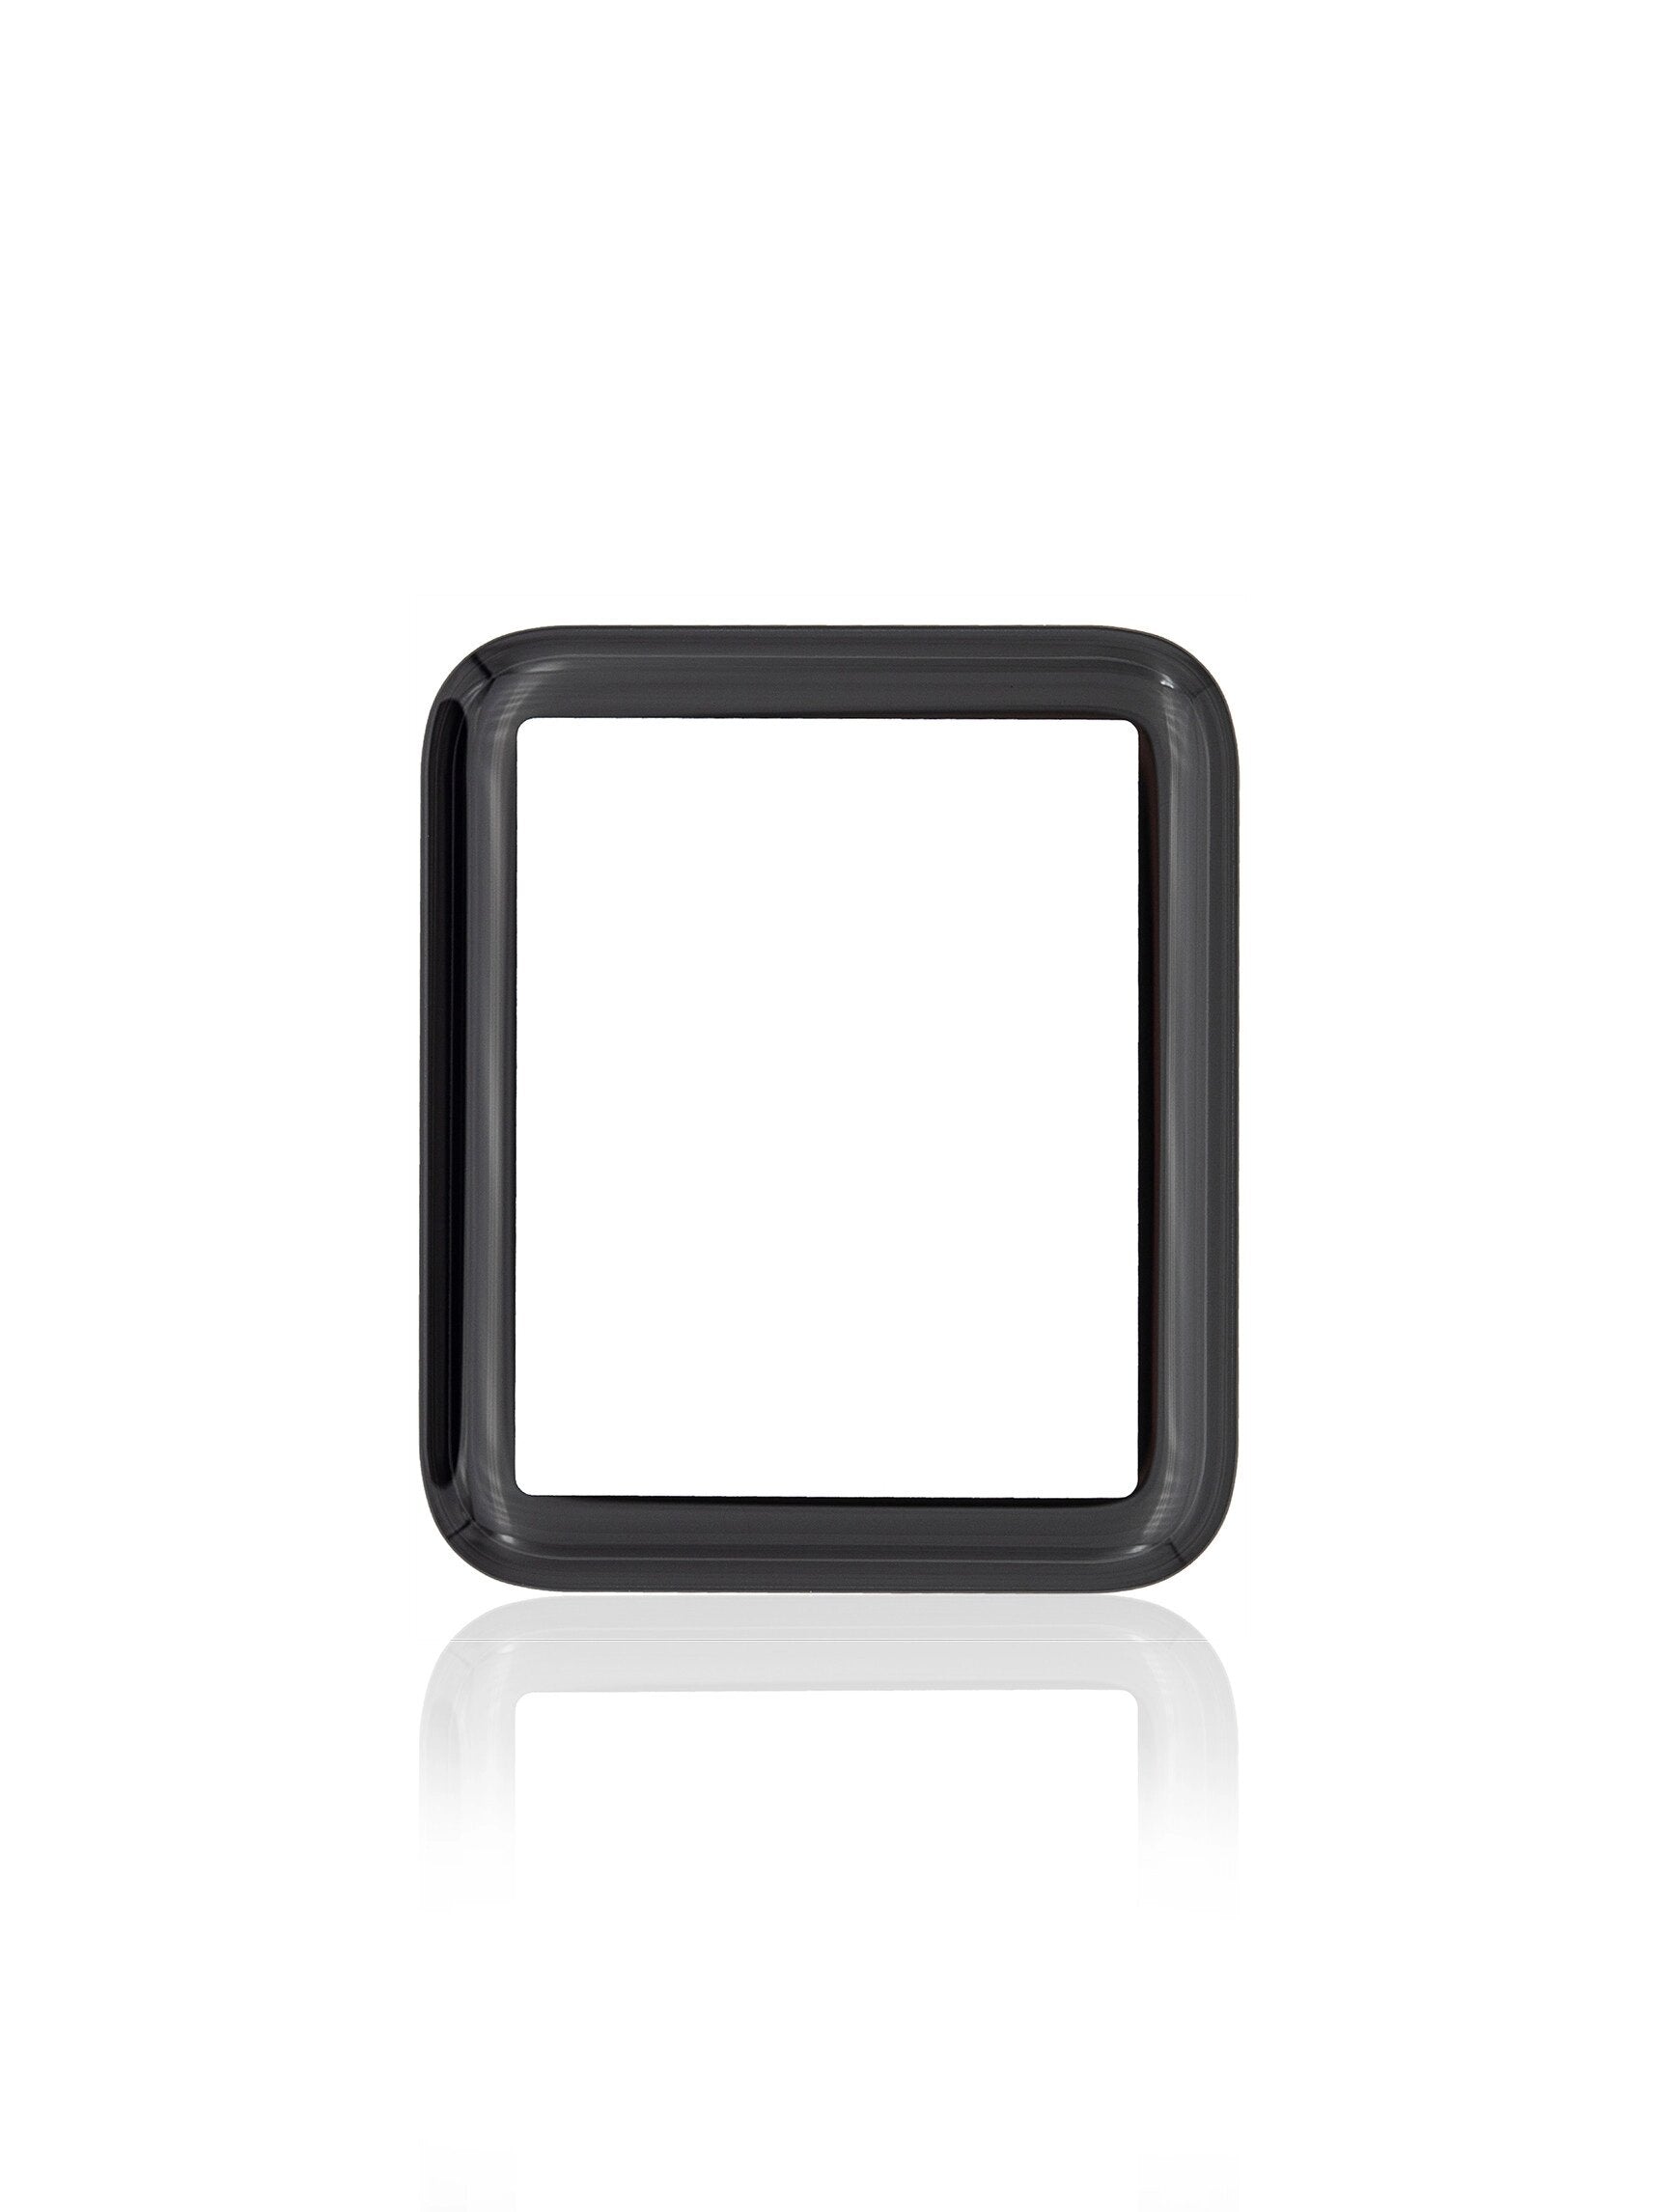 FRONT COVER GLASS COMPATIBLE WITH APPLE WATCH SERIES 2 / SERIES 3 (42MM)